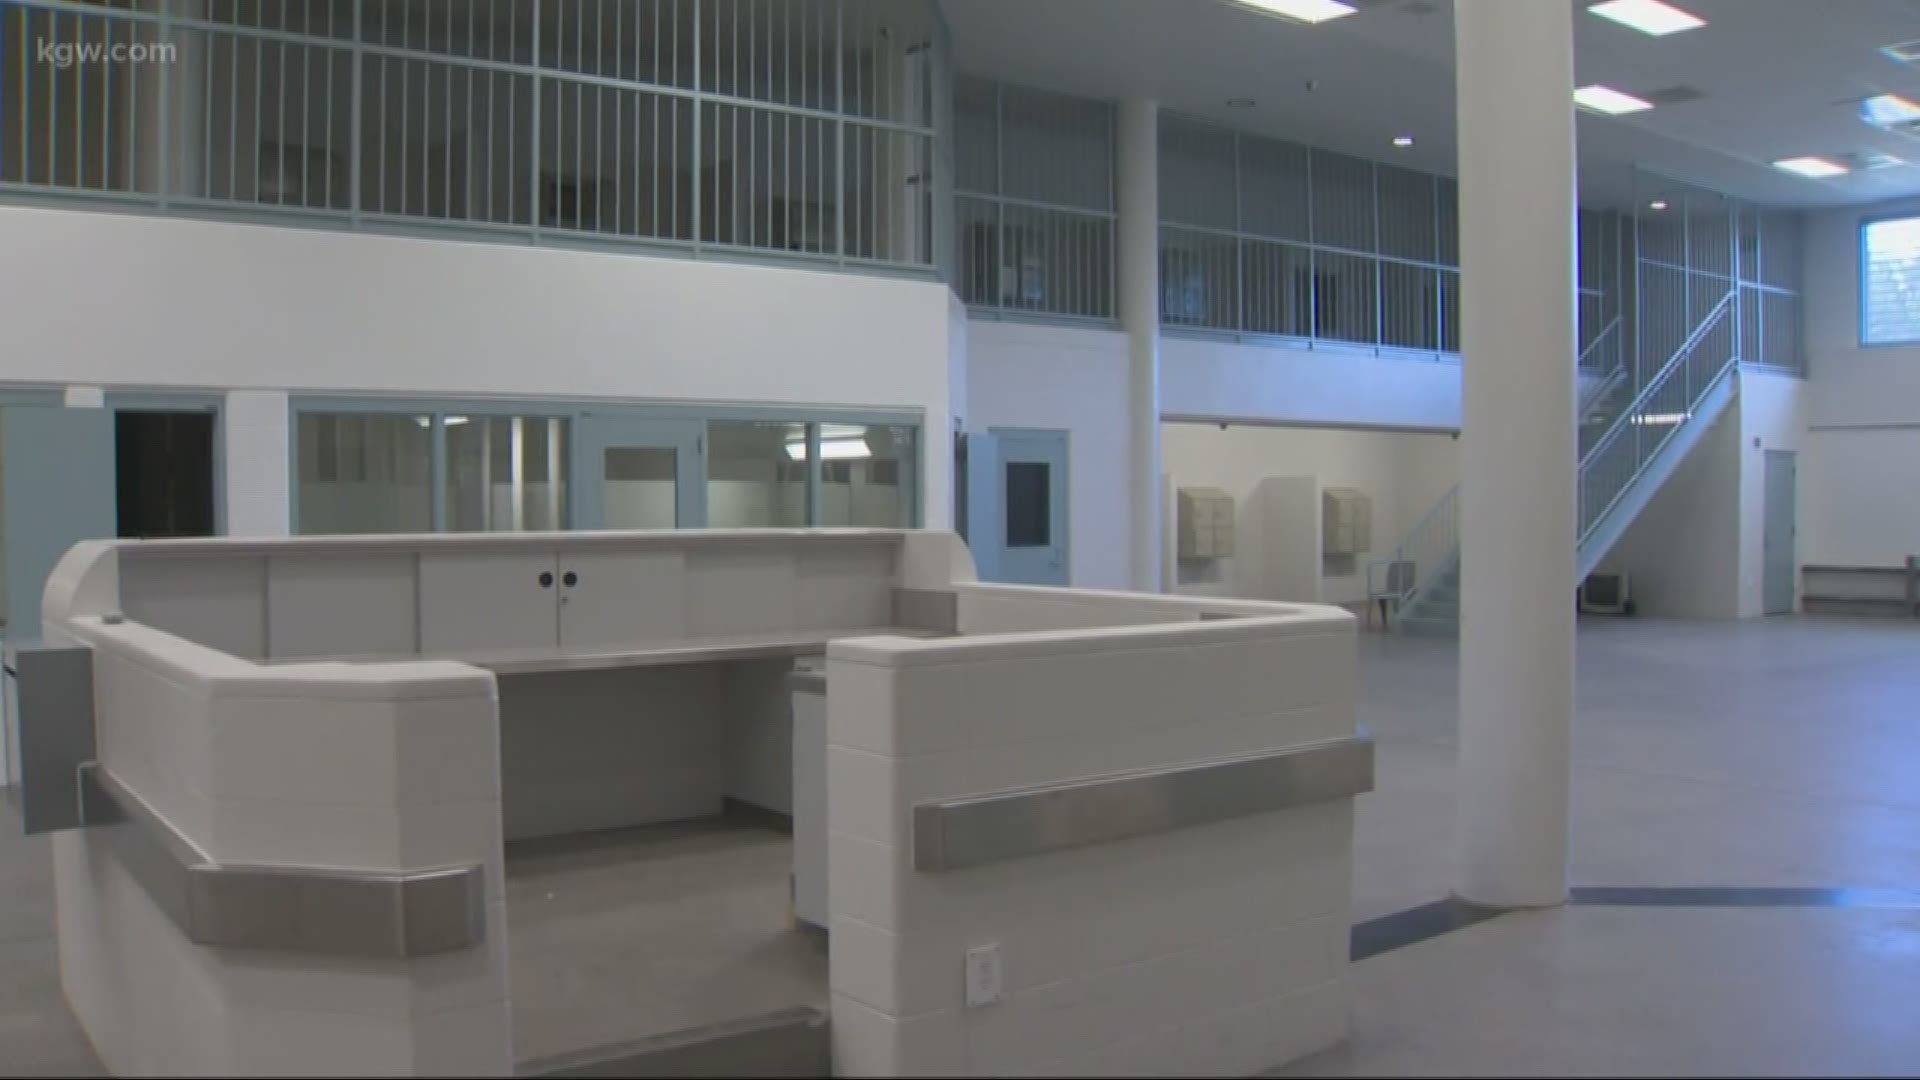 An old idea to house homeless people in Portland is resurfacing. Wapato Jail property owner Jordan Schnitzer and former county commissioner Loretta Smith want the jail to be used as a temporary shelter for the homeless.